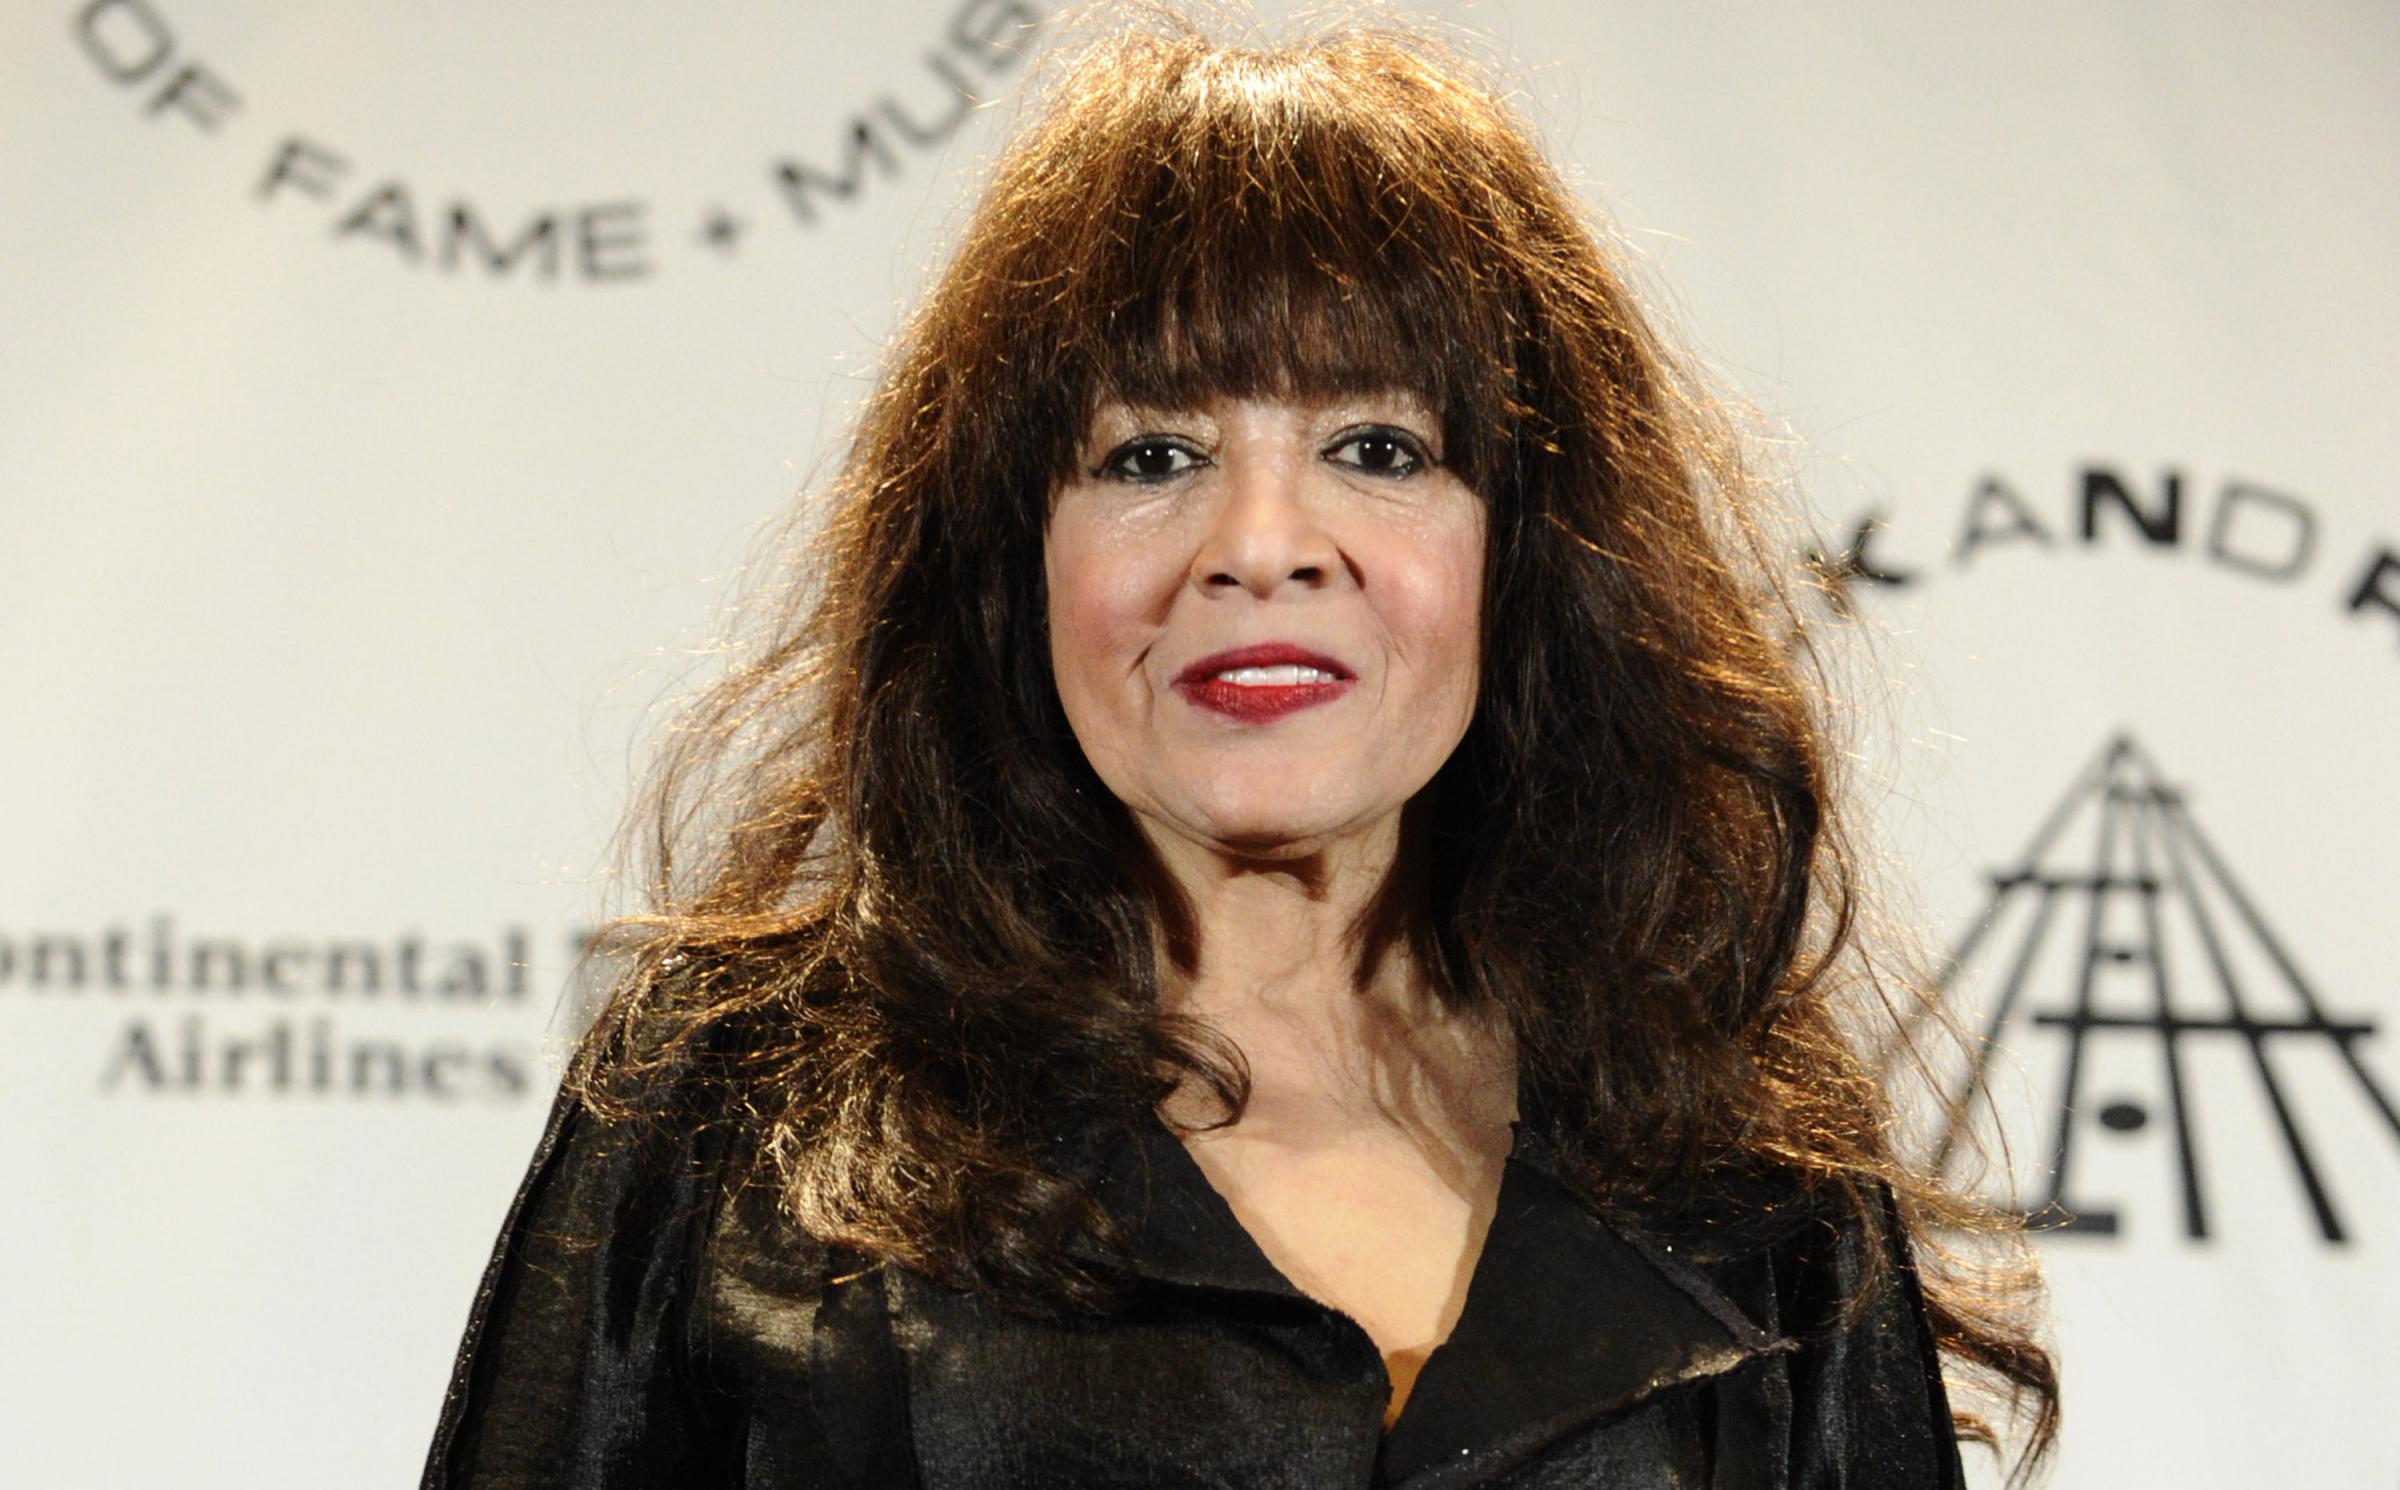 Obituary: Ronnie Spector, singer and star of The Ronettes